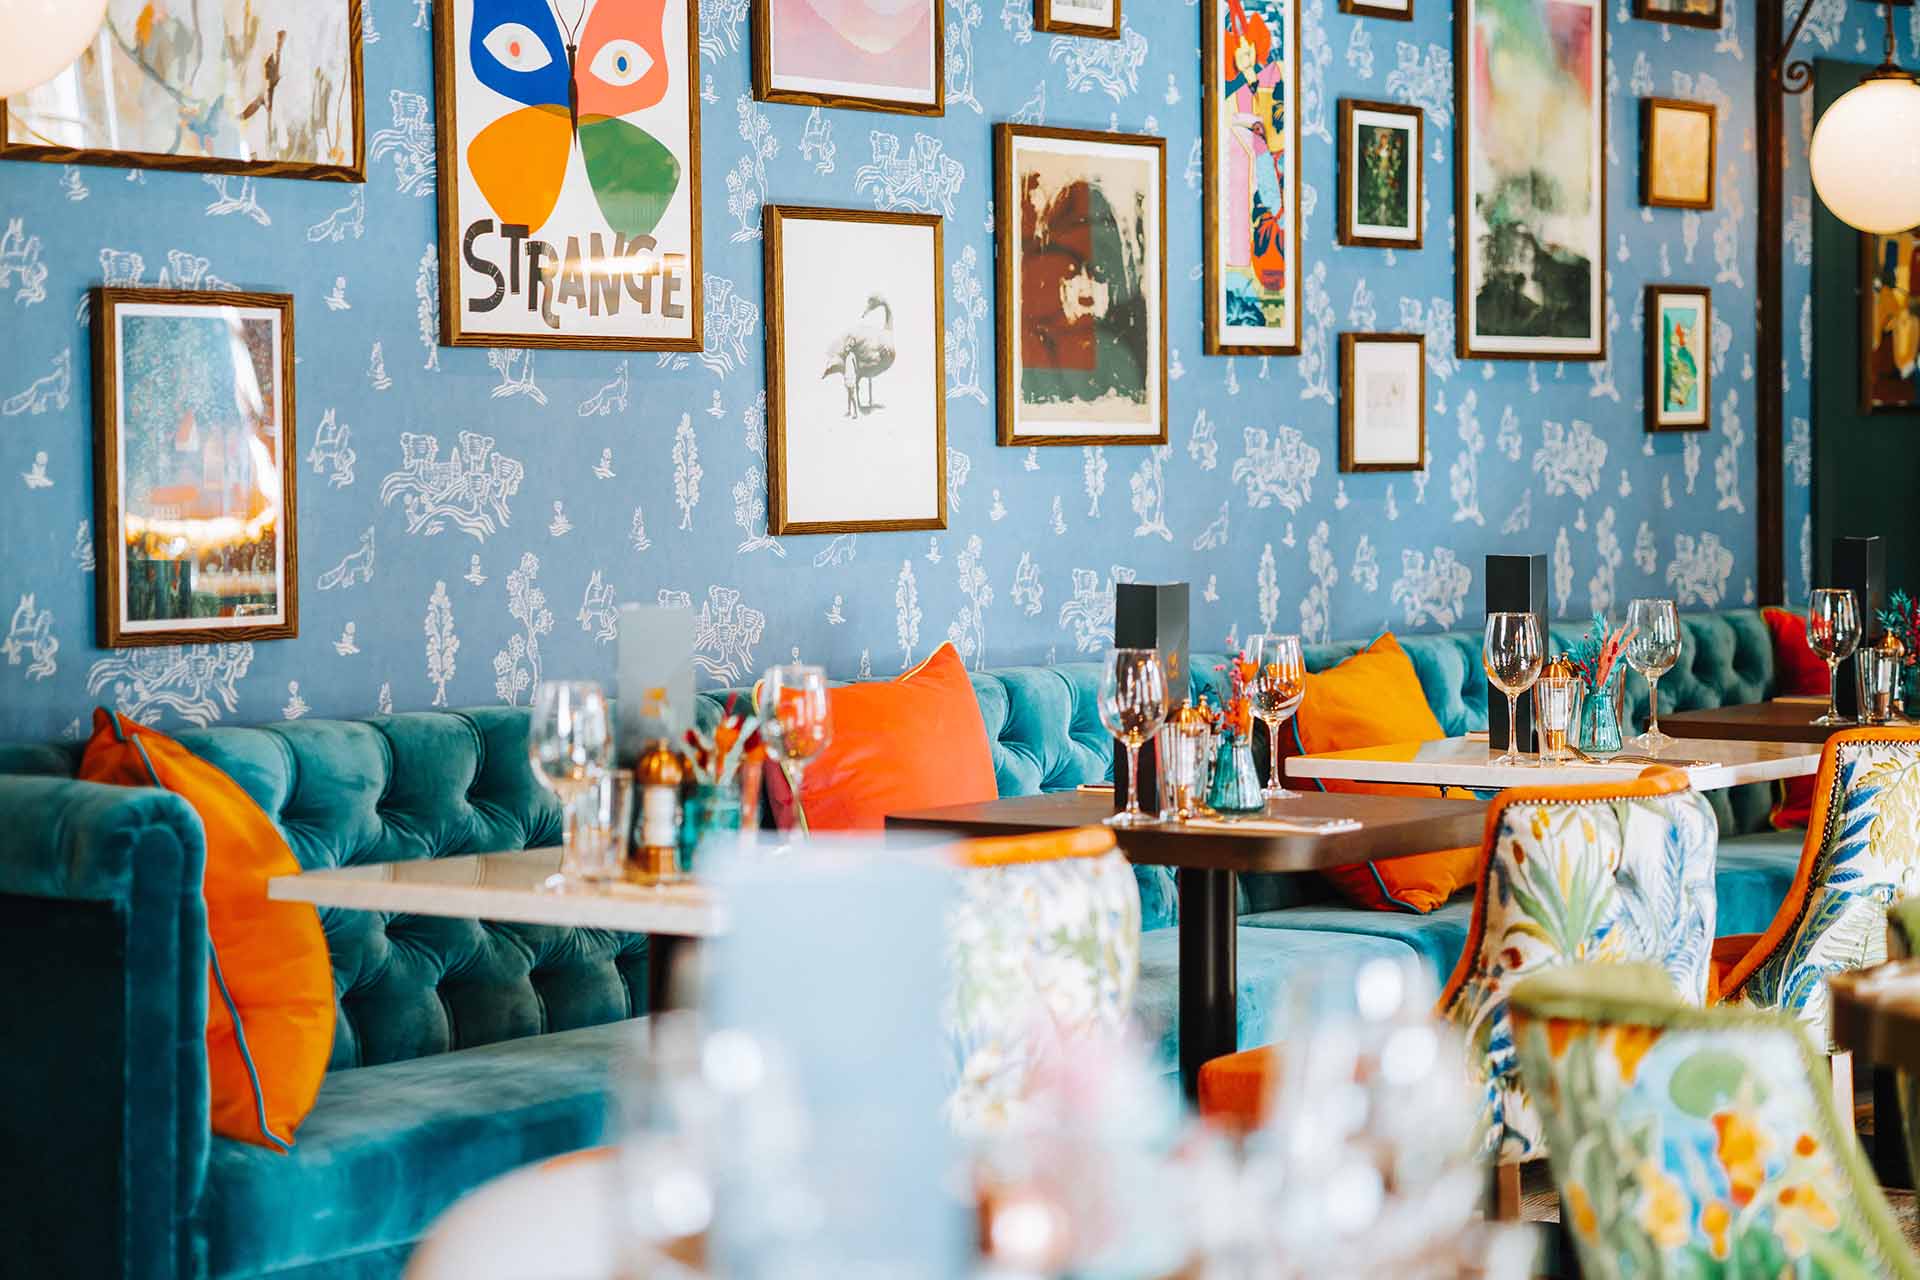 Interiors with blue and orange design, blue wallpaper and framed art on the walls